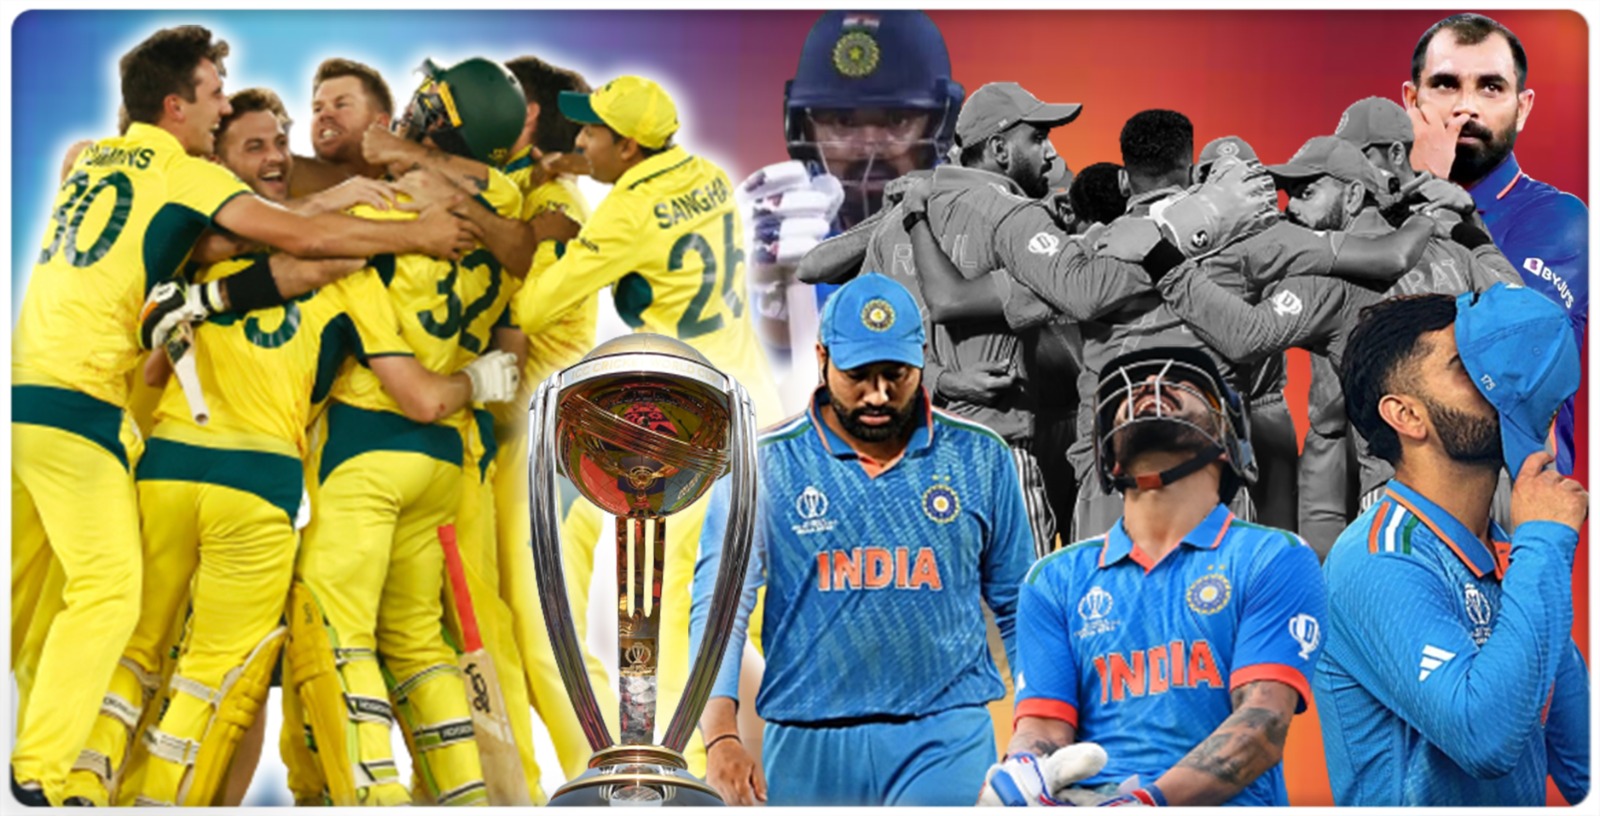 Australia Beat India by 6 Wickets in ICC World Cup Finals